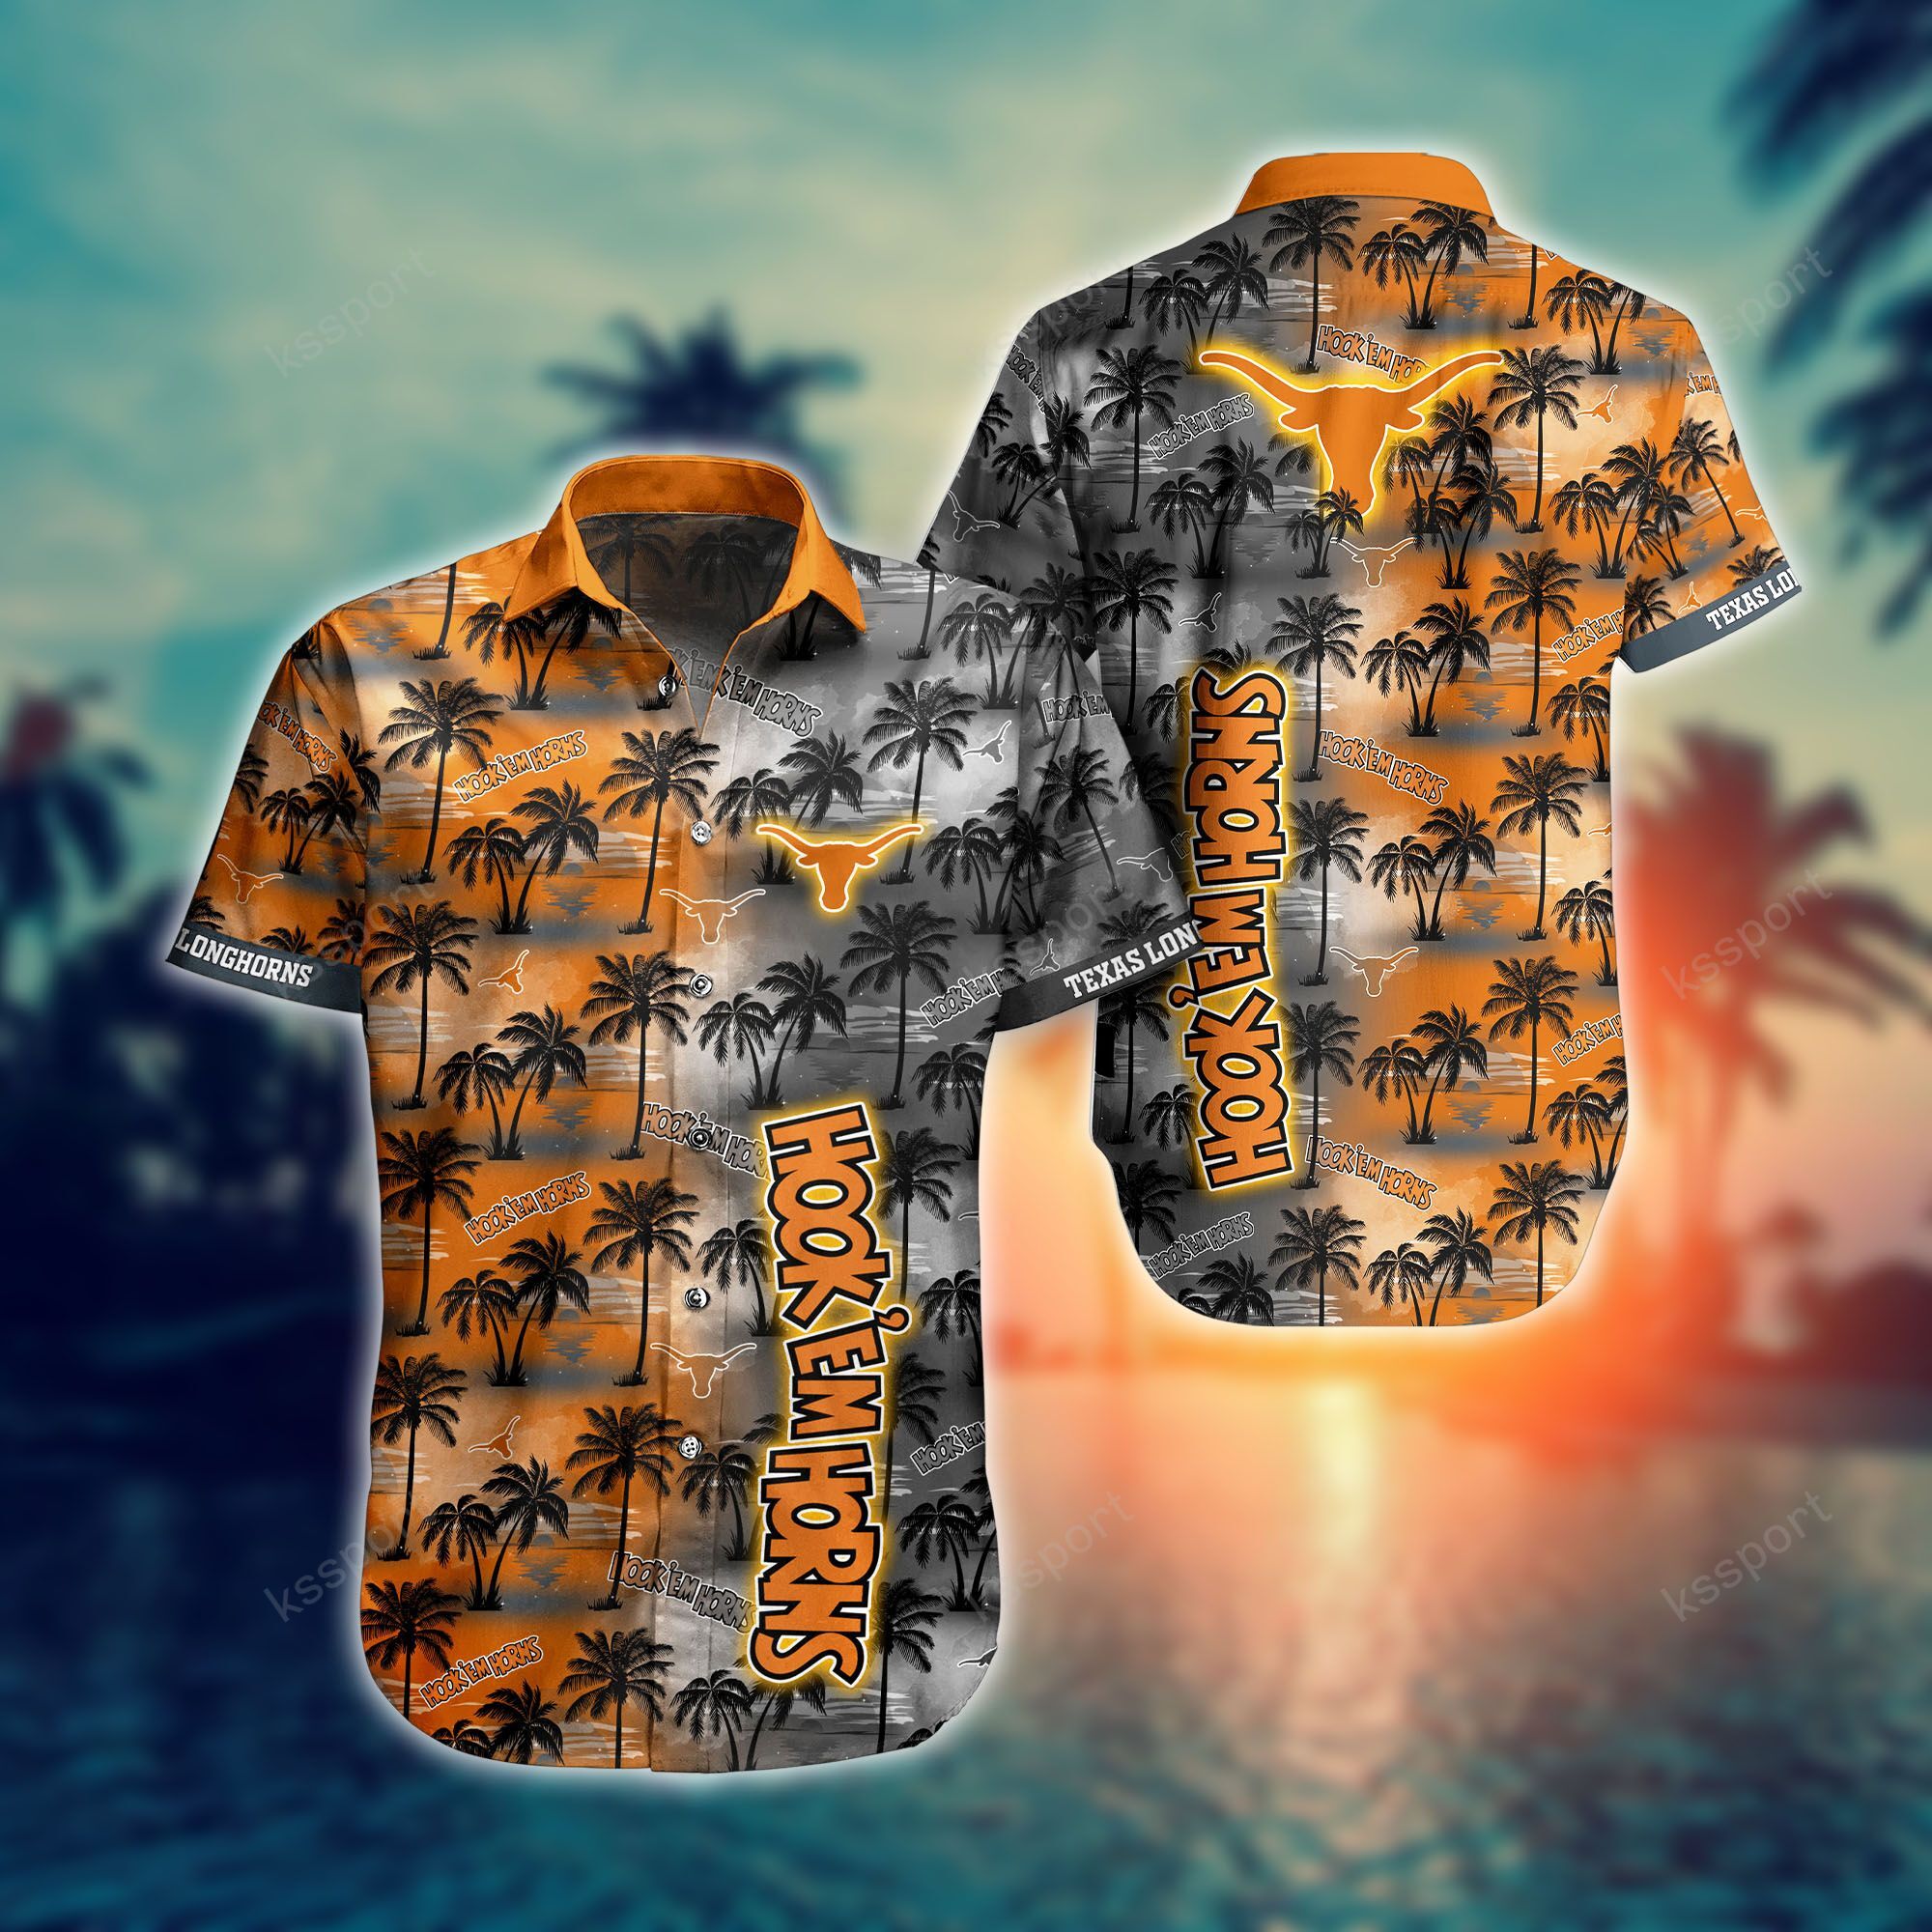 Treat yourself to a cool Hawaiian set today! 64